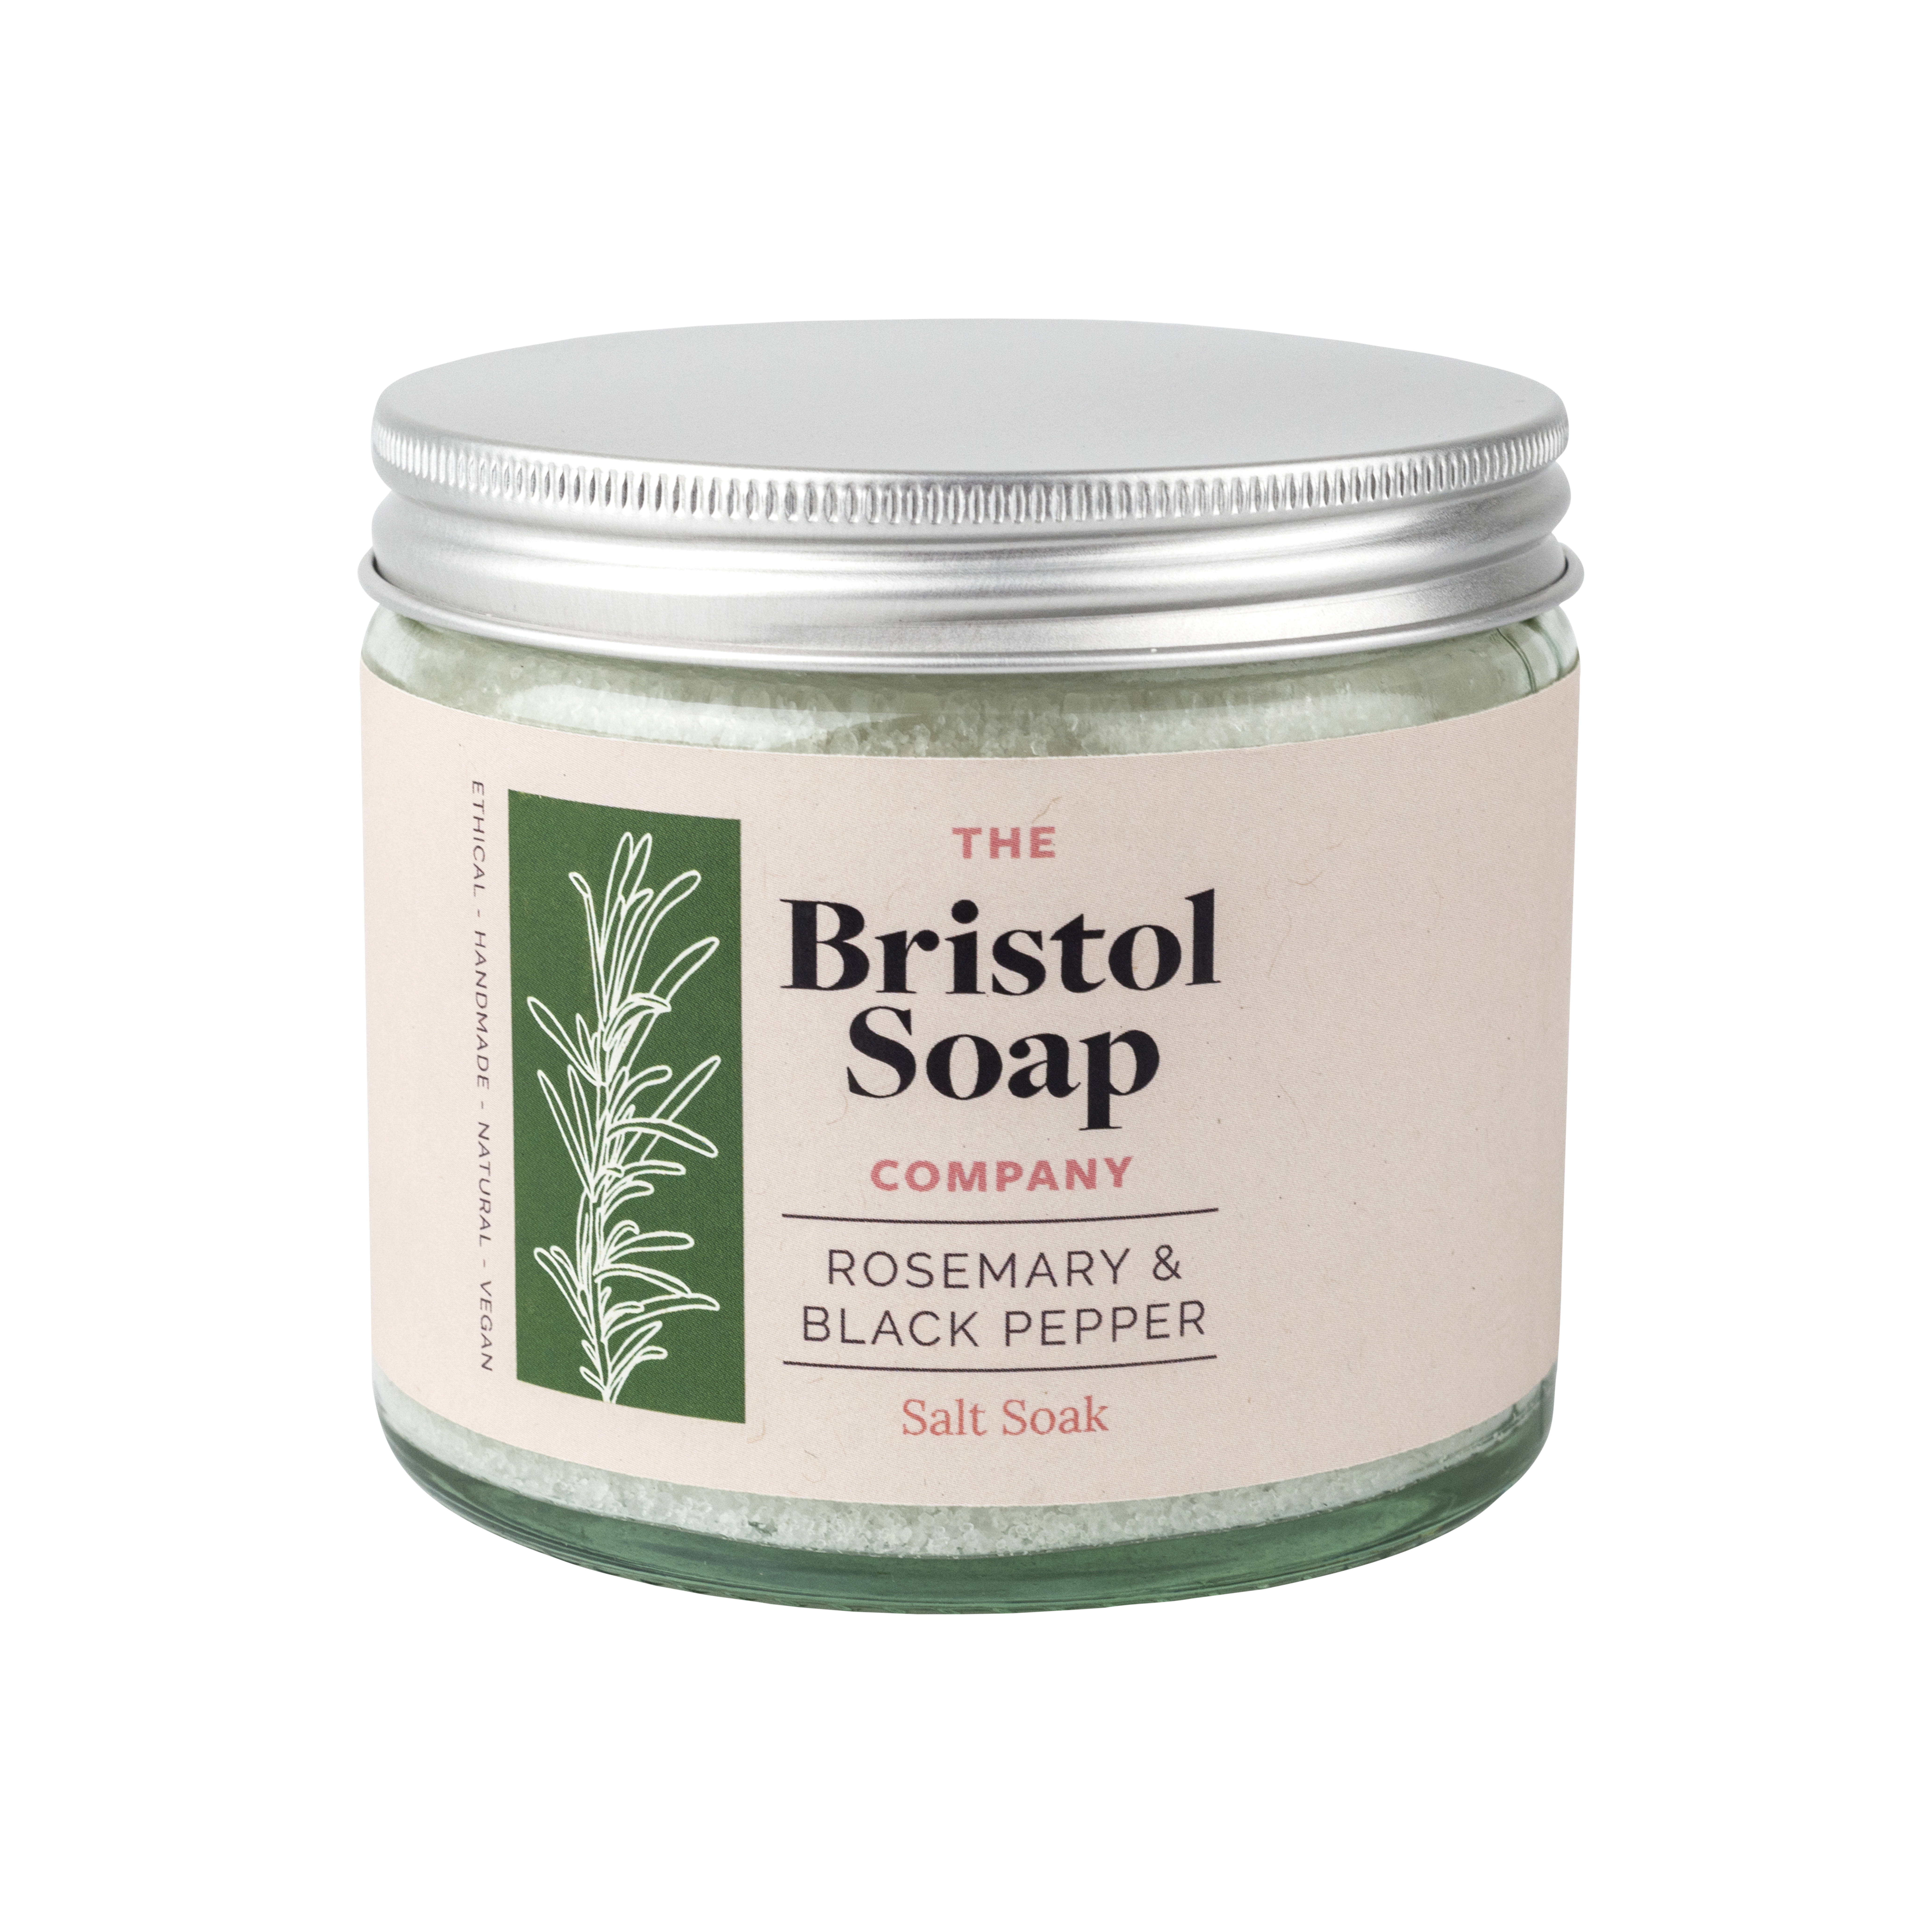 Rosemary and Black Pepper Salt Soak 225g by The Bristol Soap Company